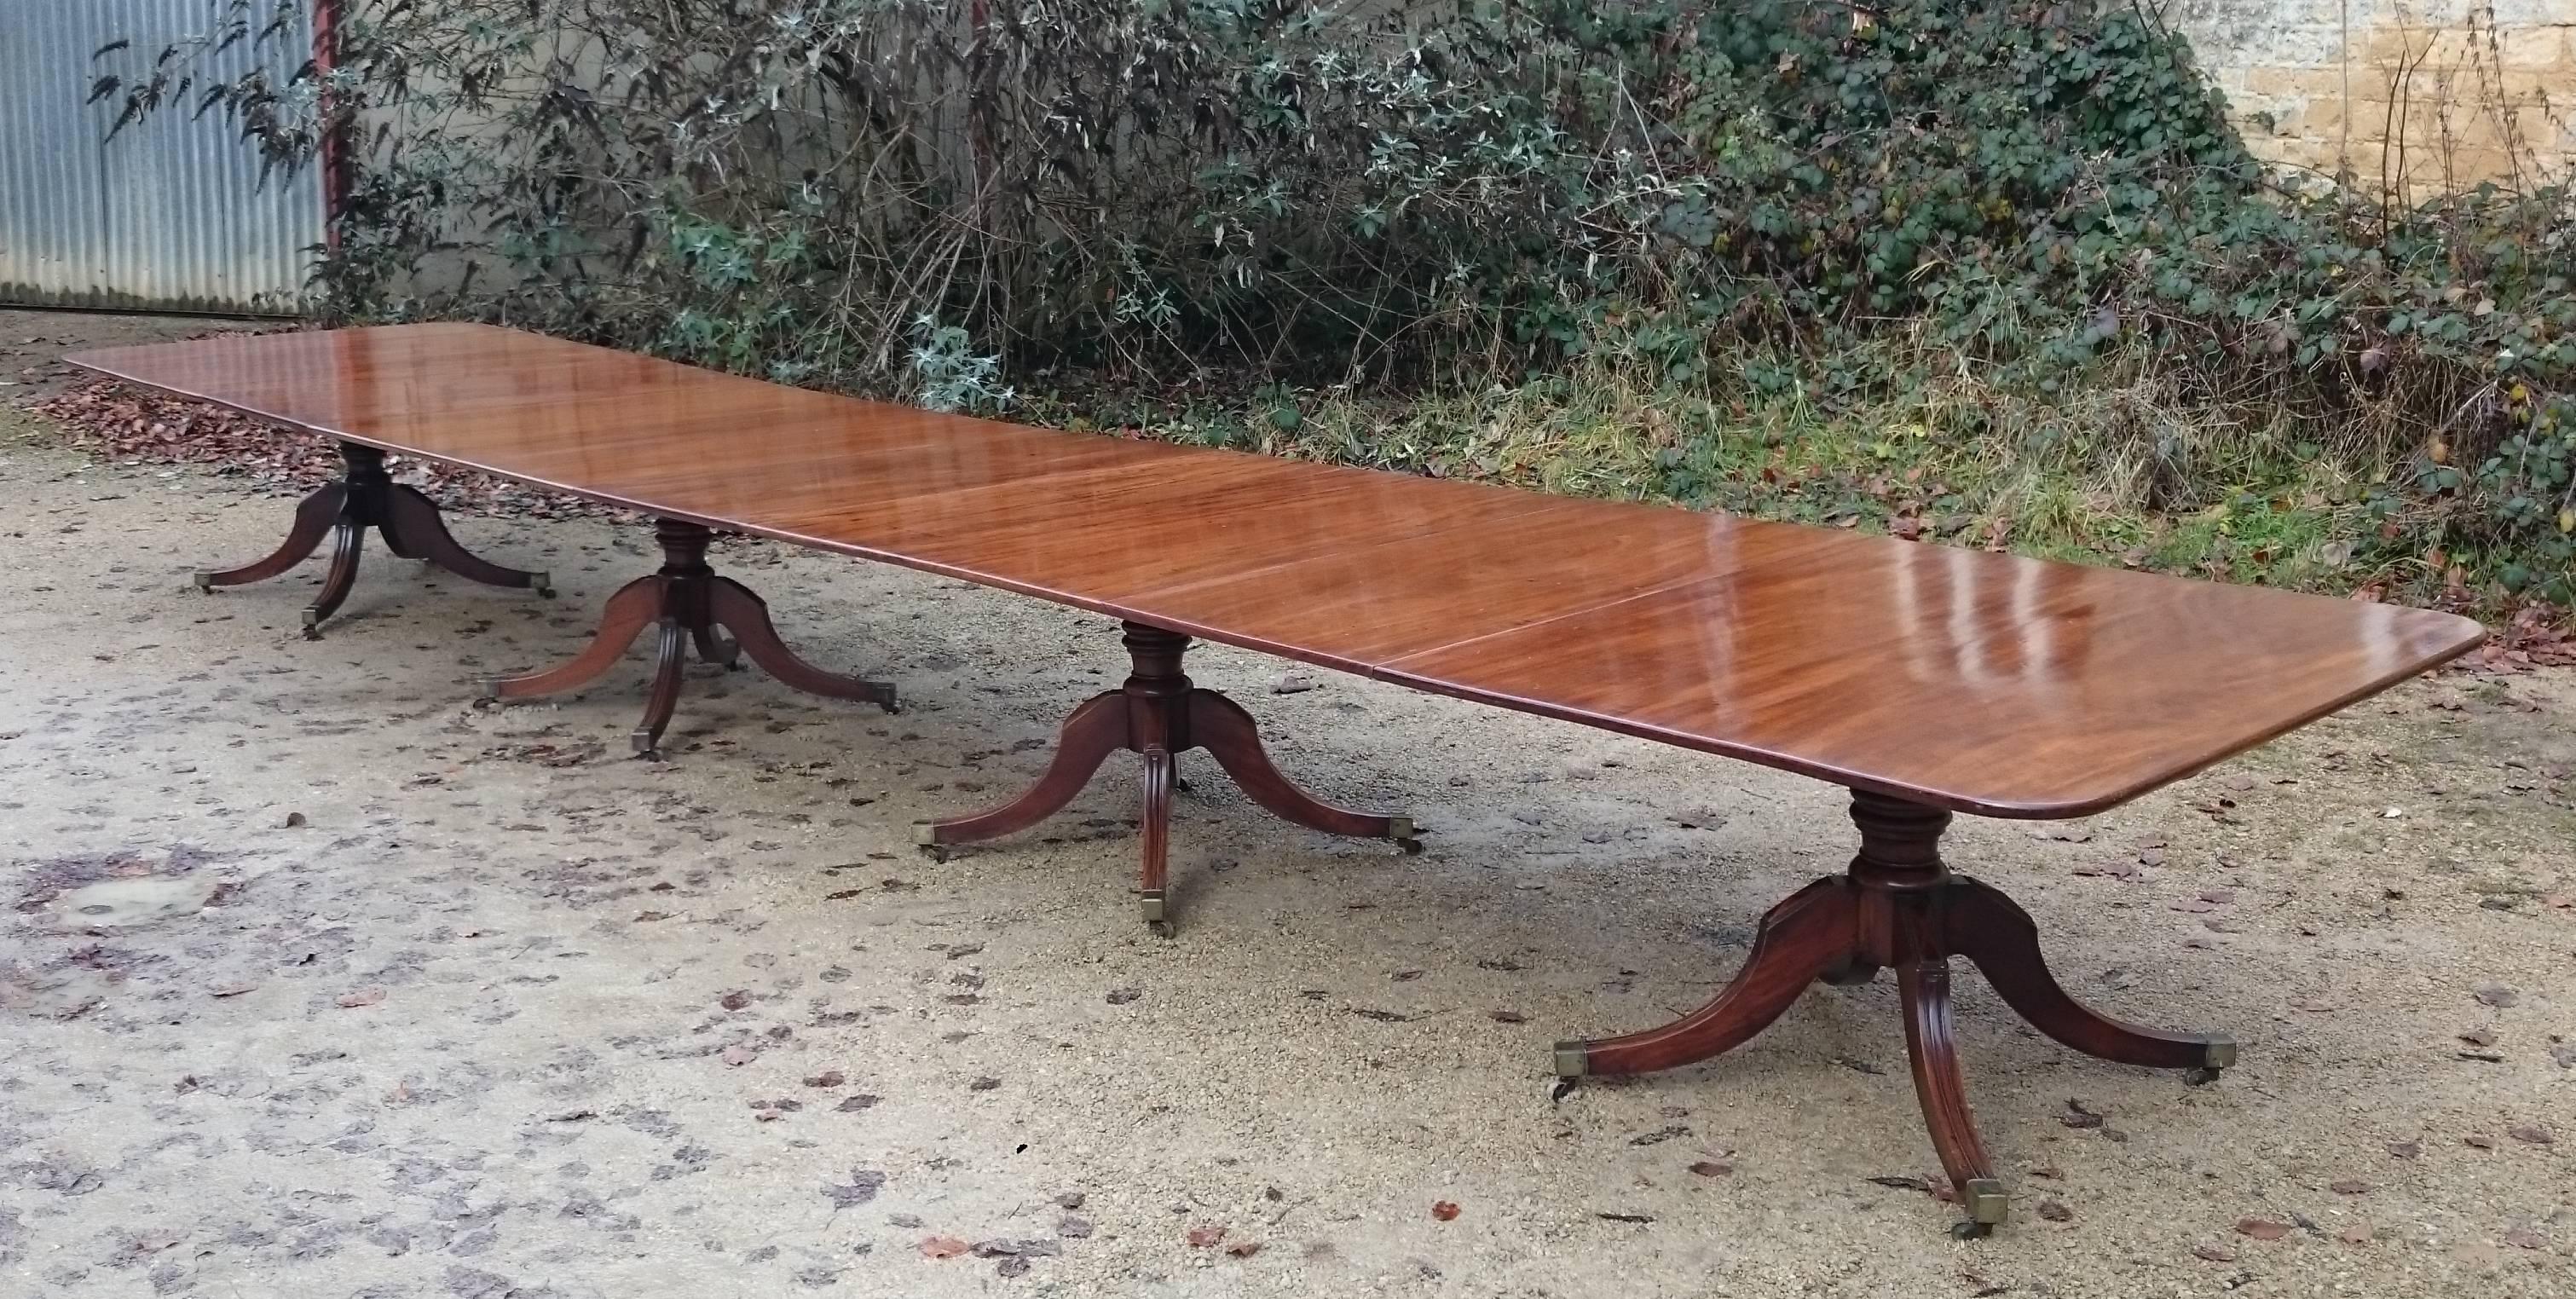 This early 19th century antique three pedestal dining table has been extended to a massive 20 foot (244